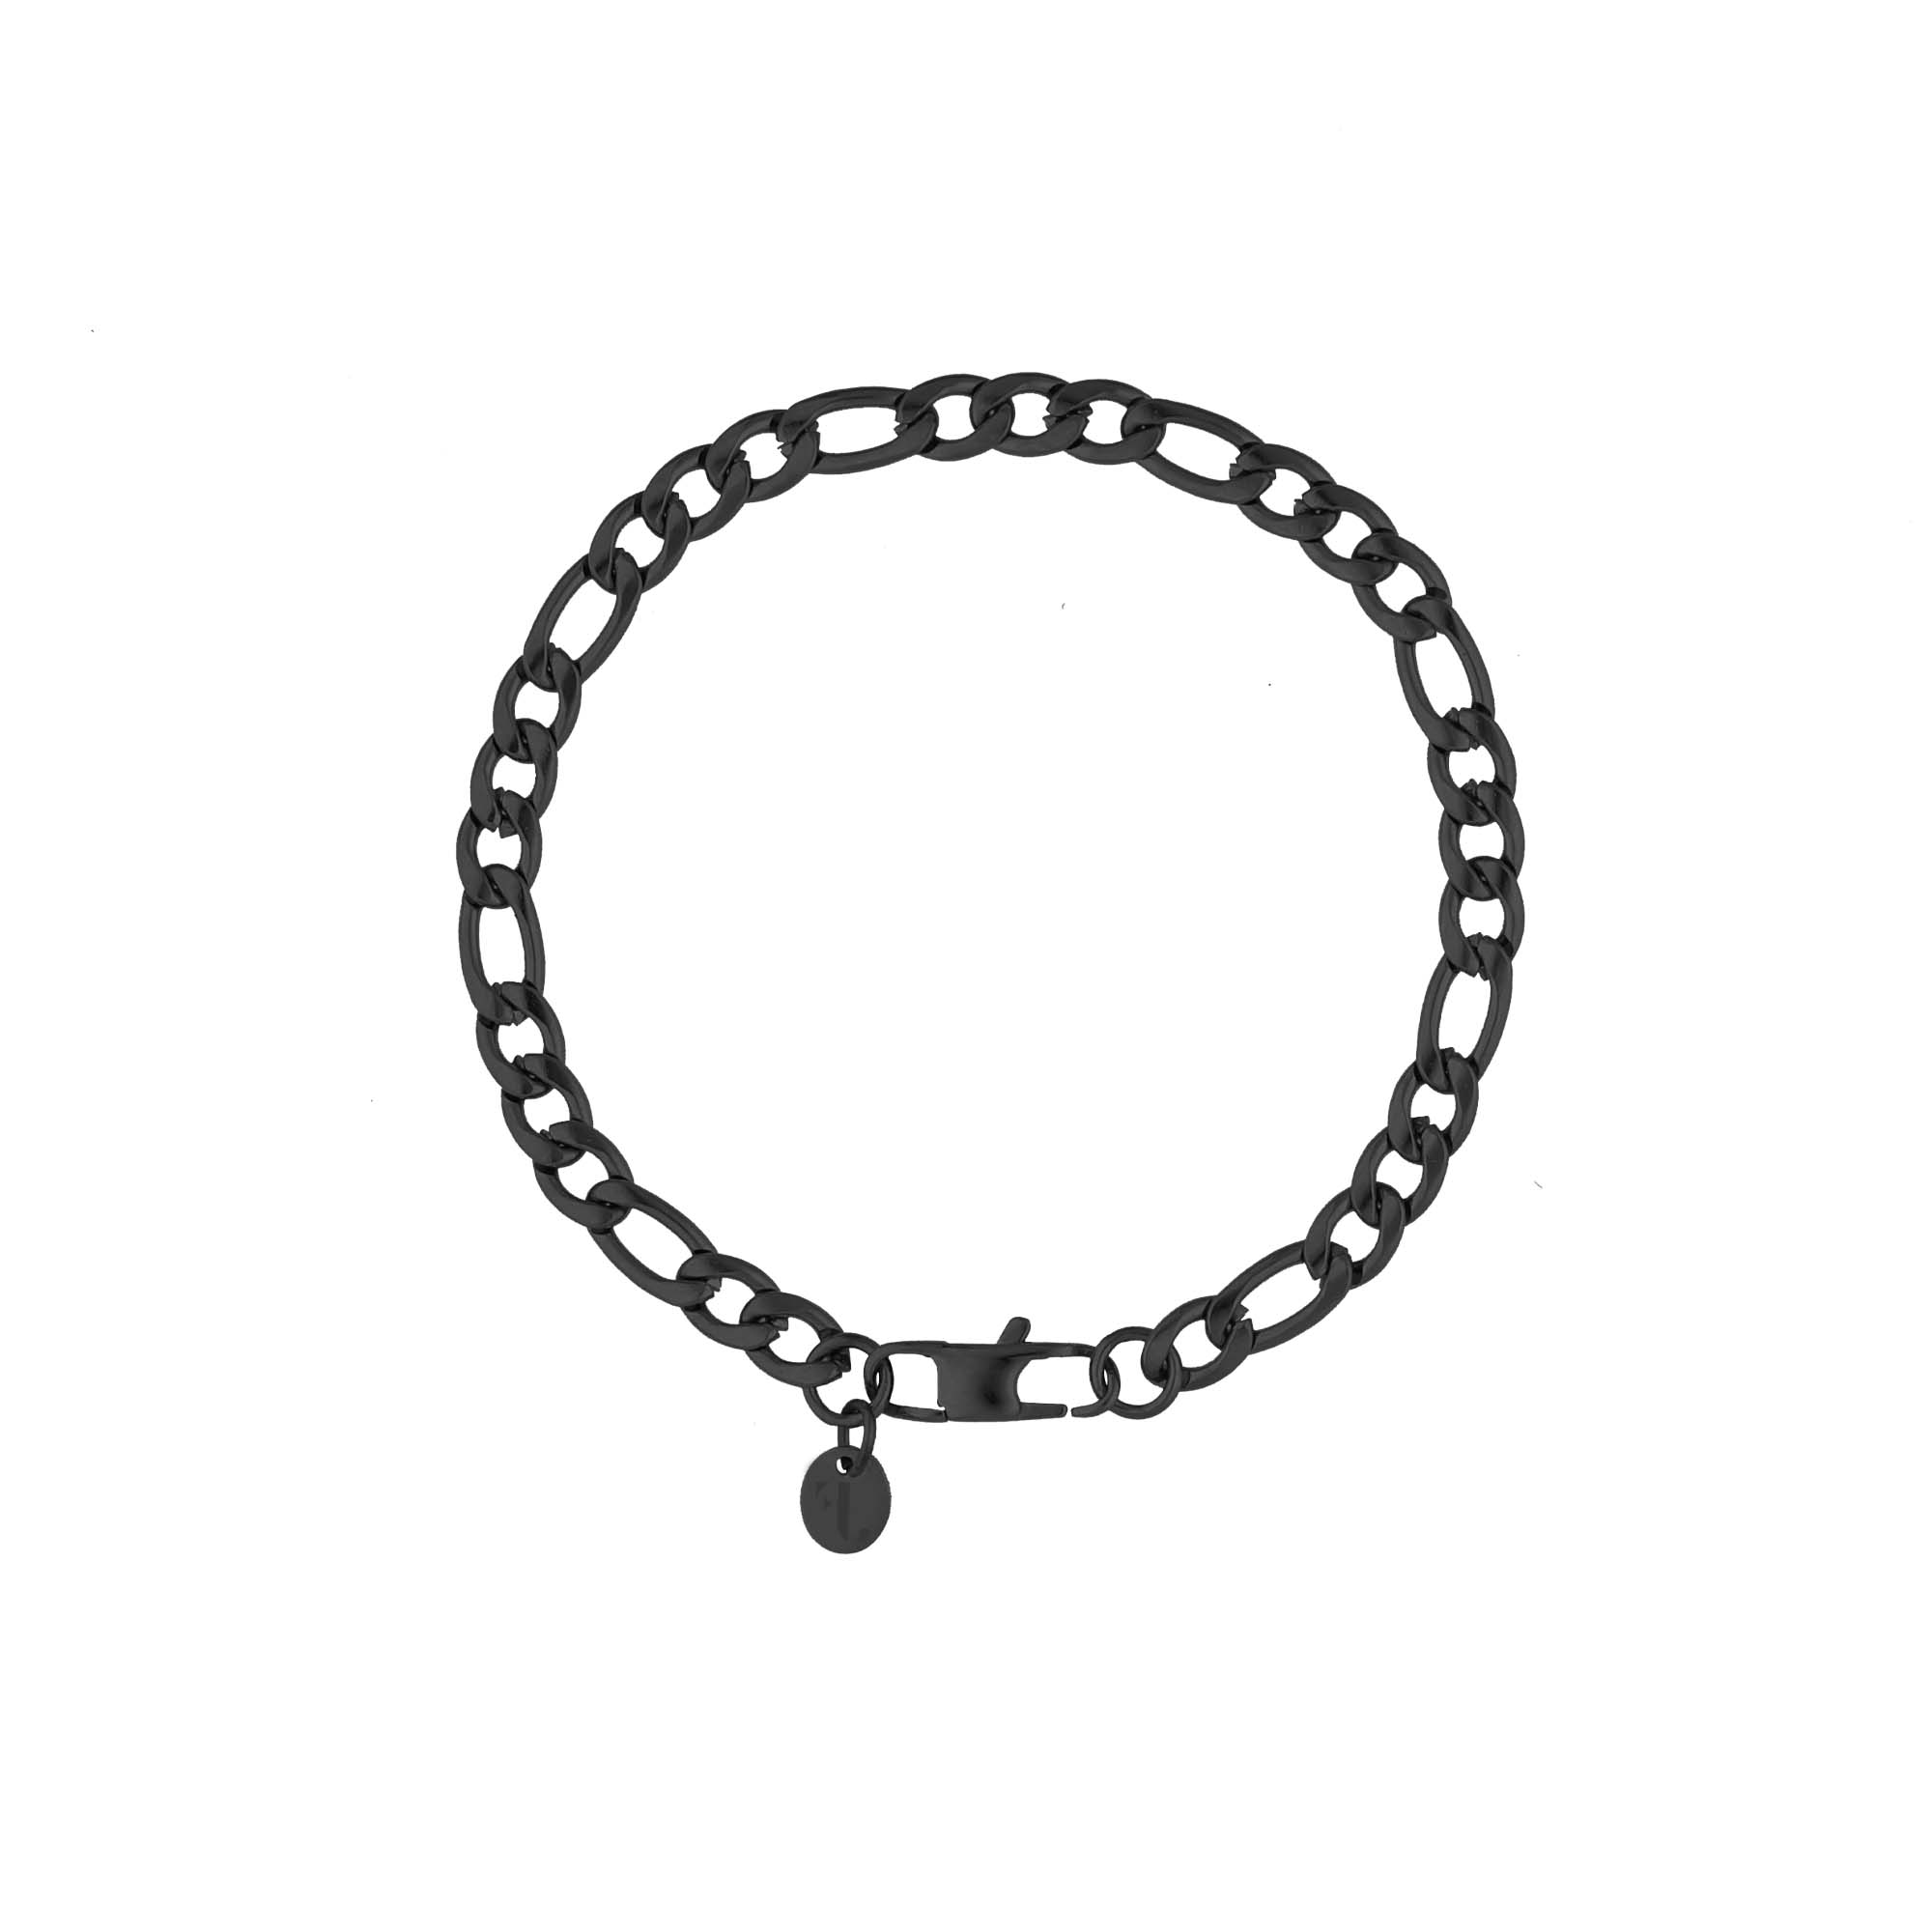 Rhône men's bracelet by Five Jwlry, crafted from a 5mm figaro chain in black-colored, water-resistant 316L stainless steel. Available in sizes 20cm and 22cm, and hypoallergenic.